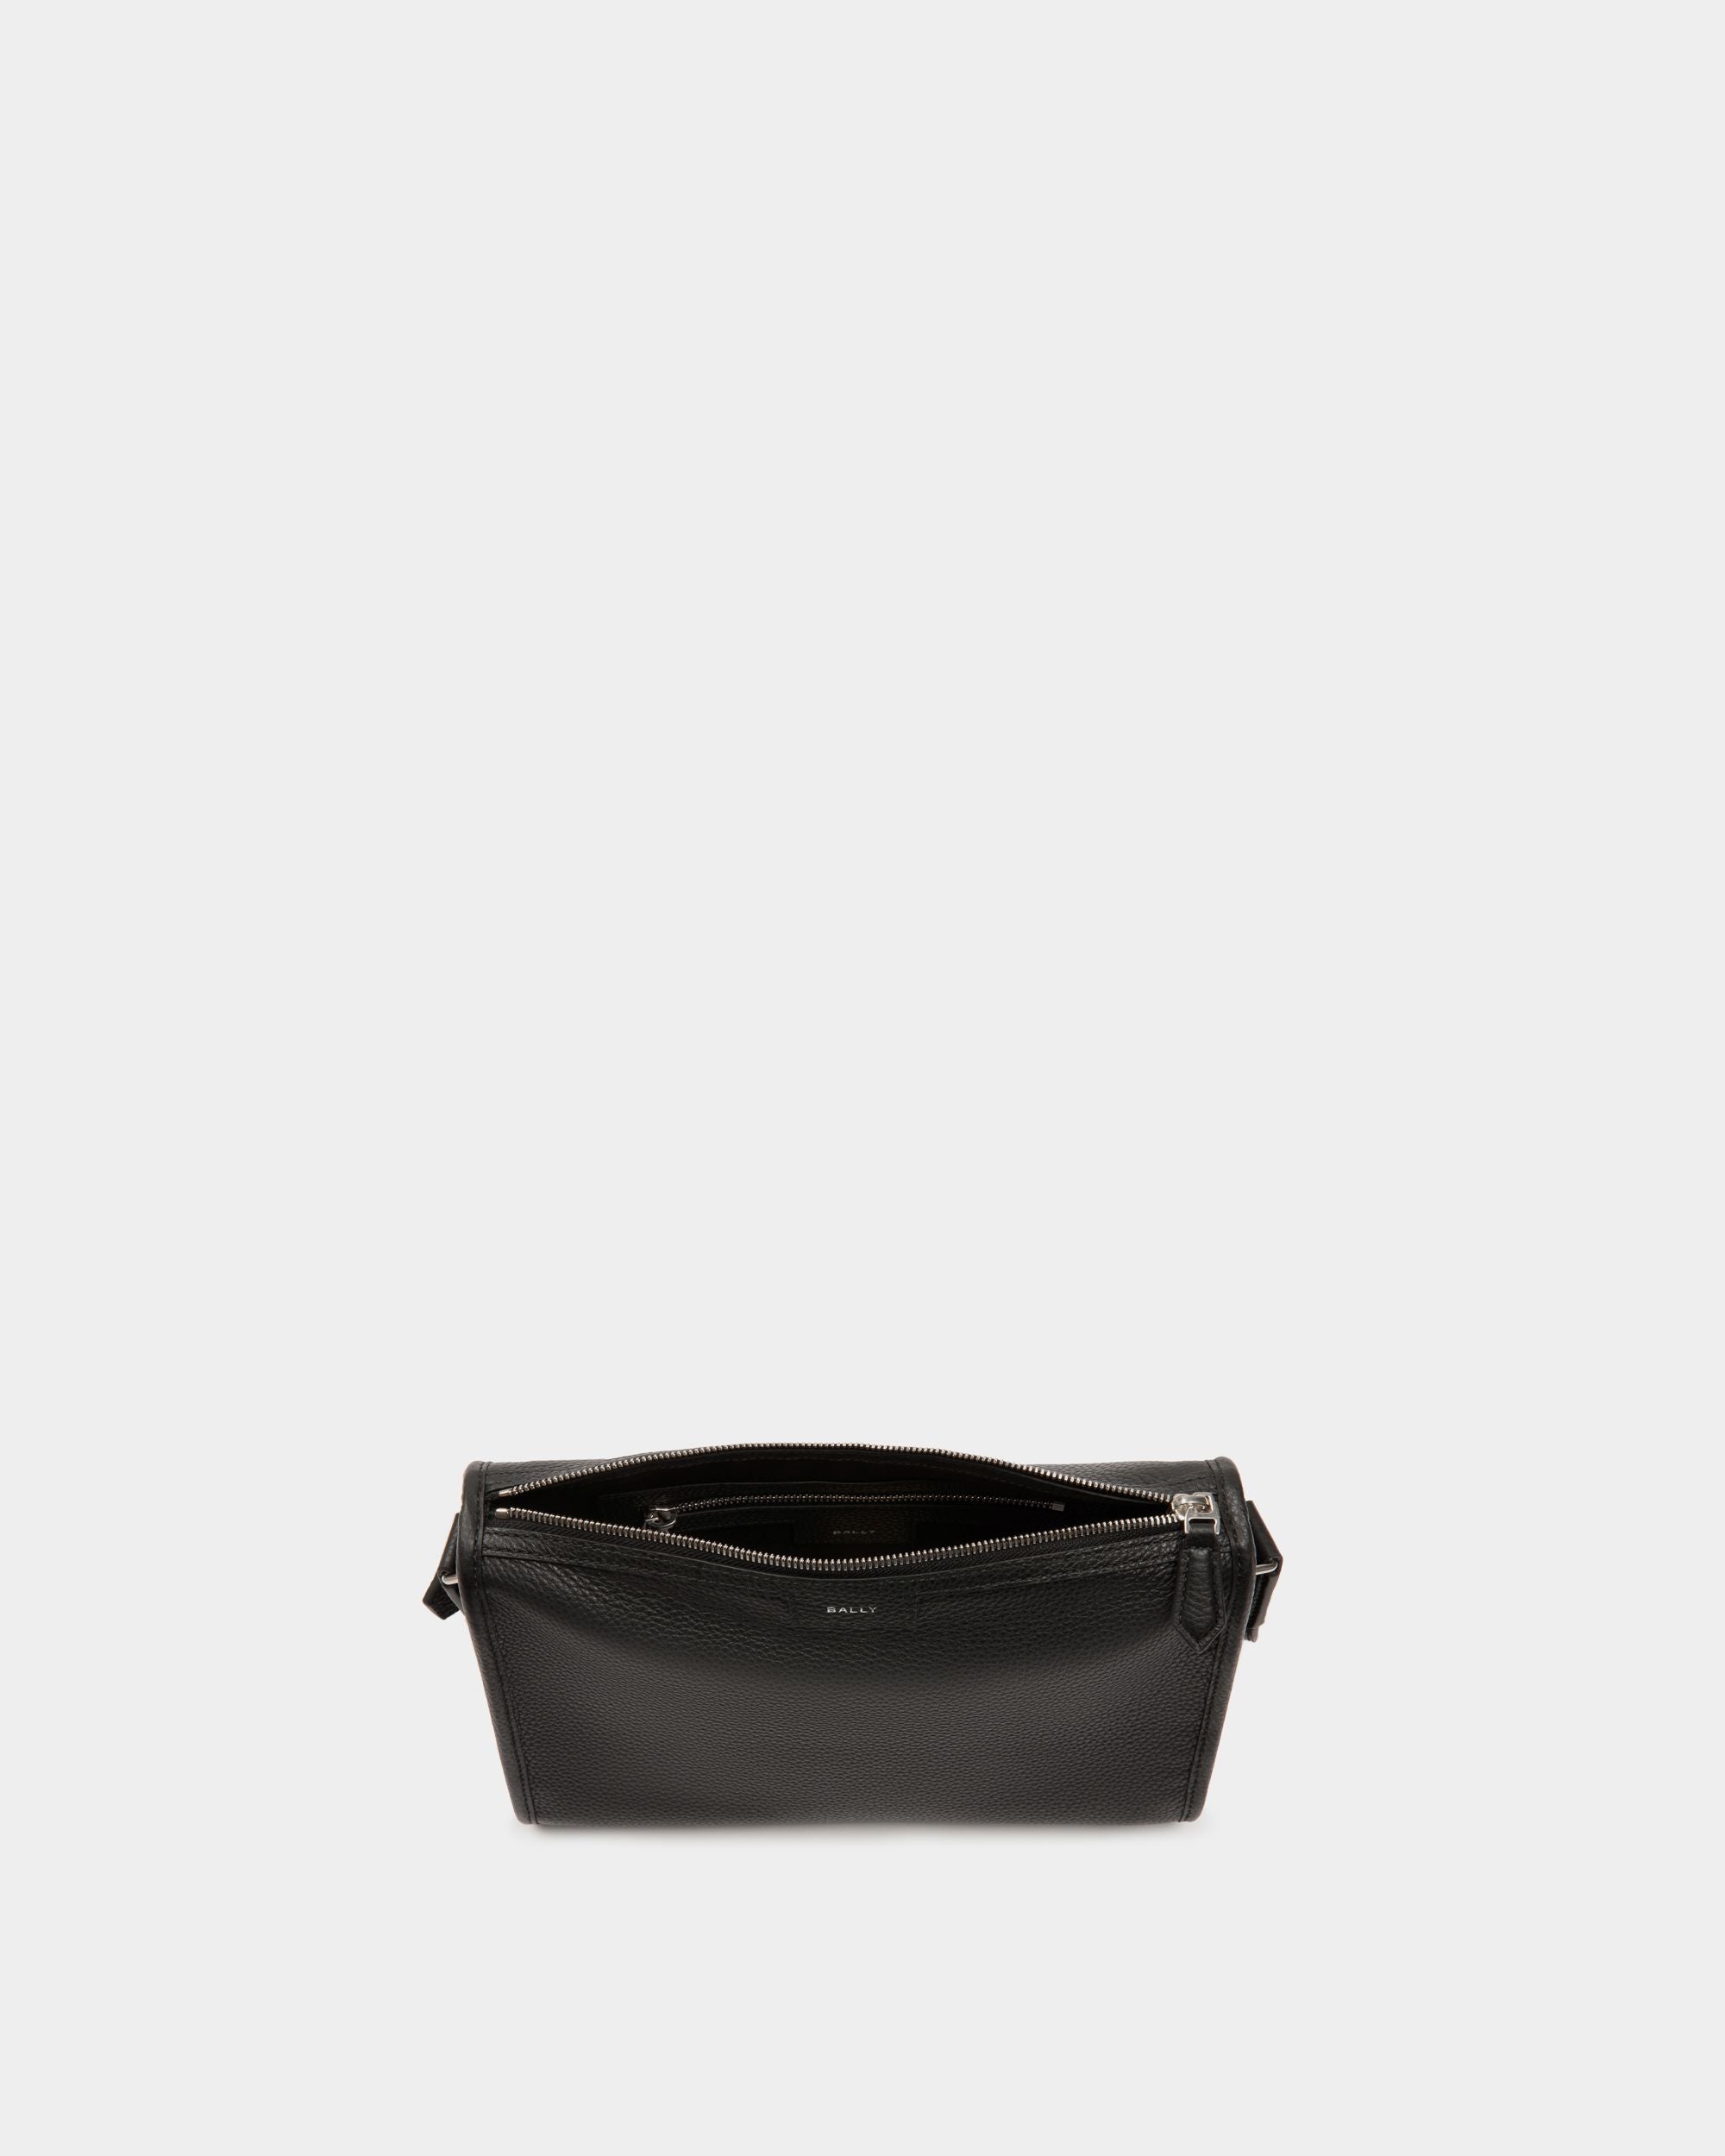 Code Small Messenger Bag in Black Grained Leather